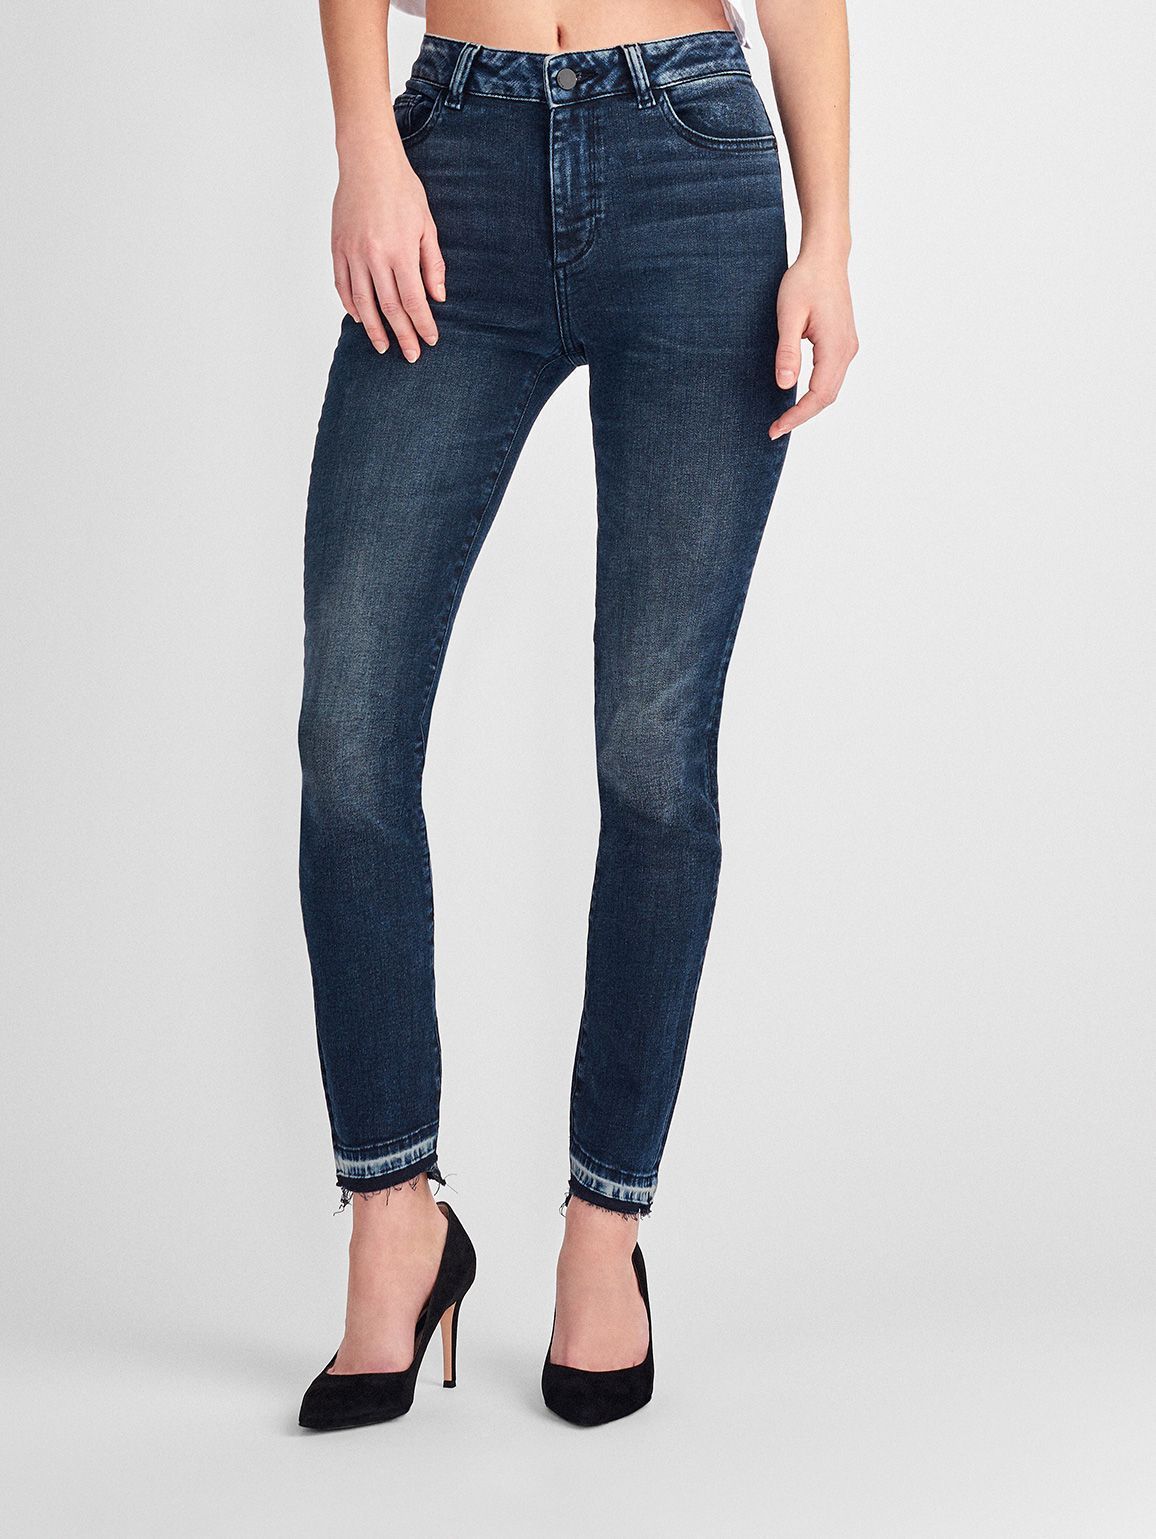 For Amazingly Soft Jeans With a Contrast Hem